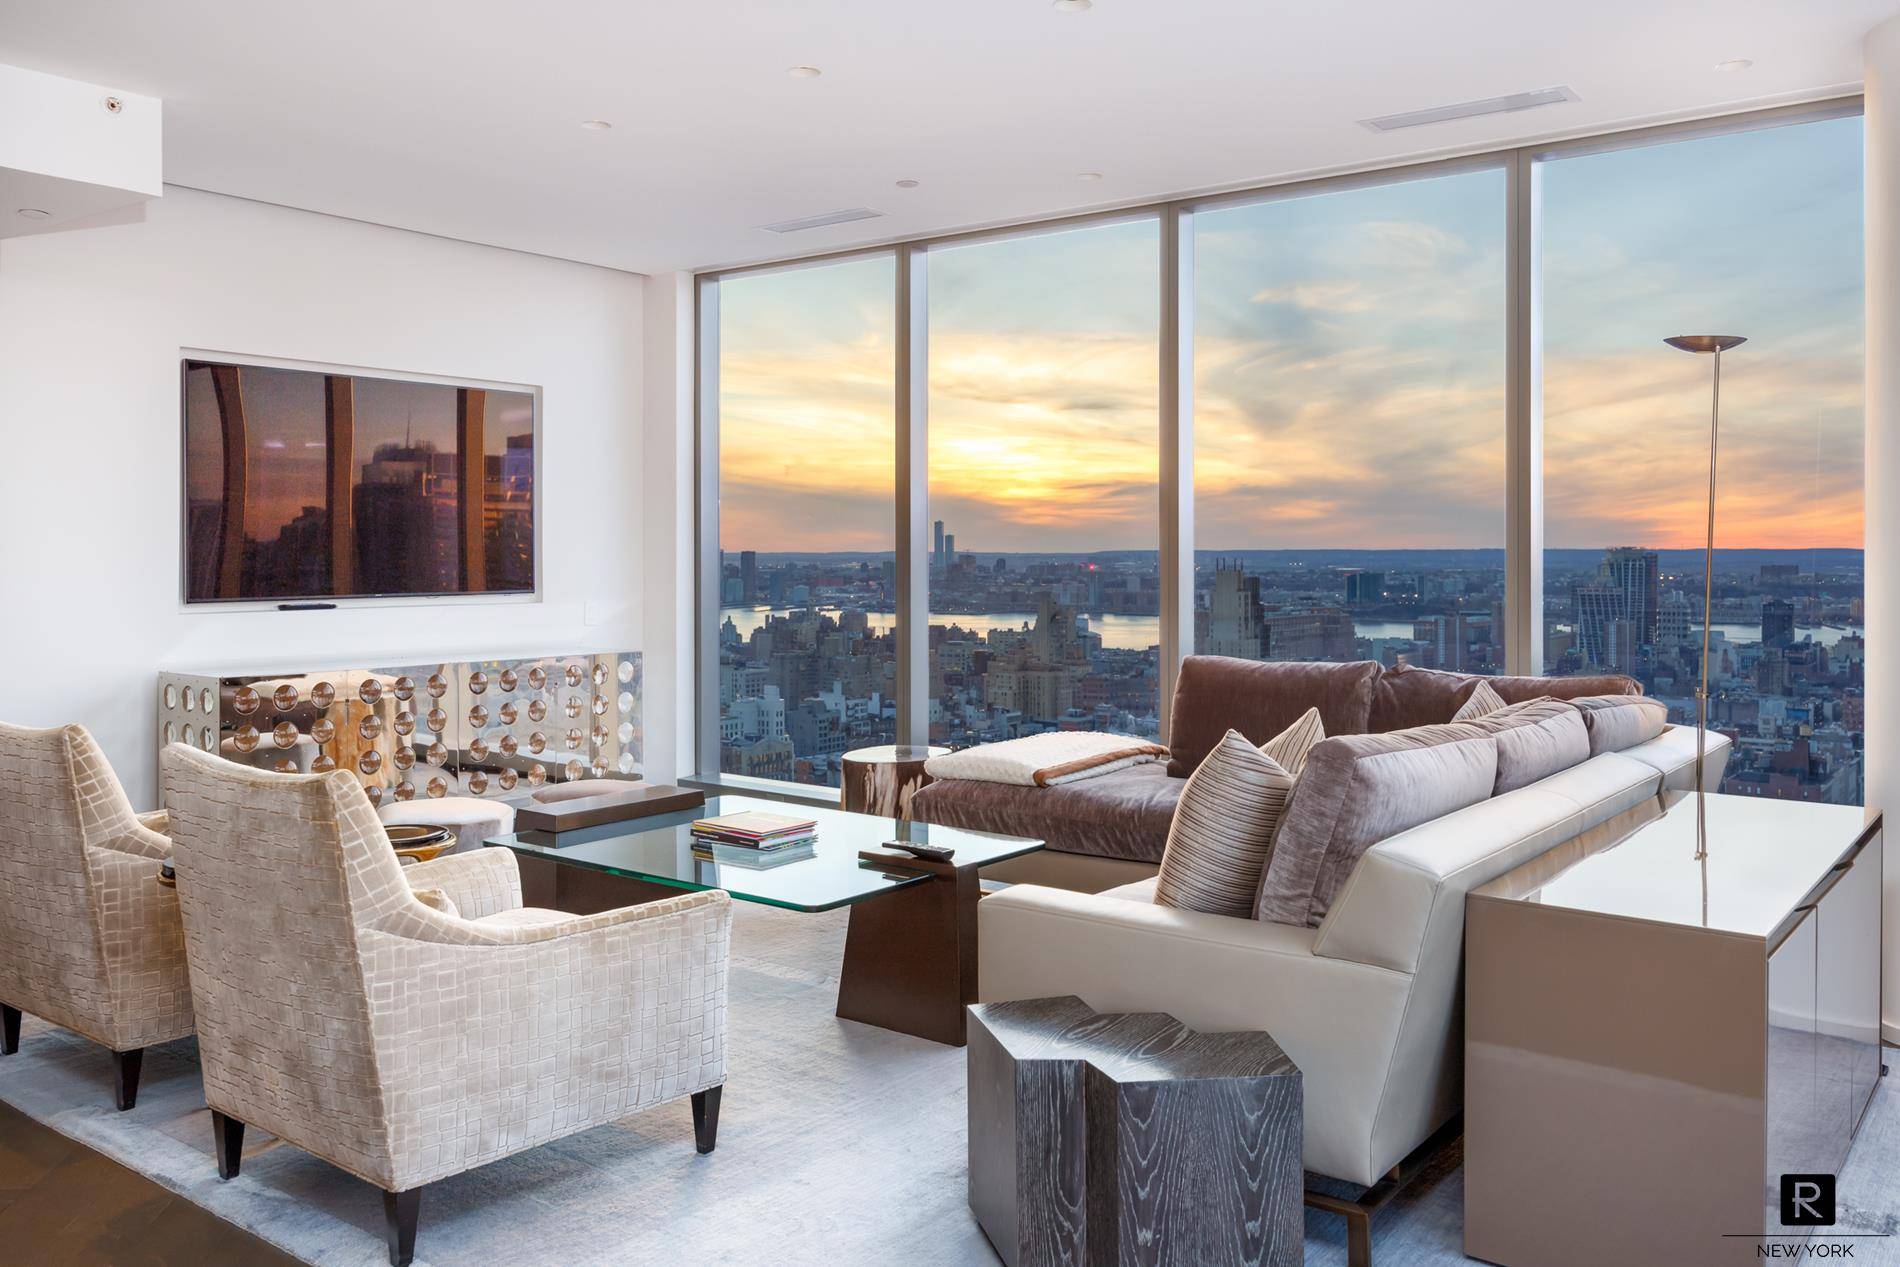 Modern elegance awaits you at One Madison, a luxury residential building towering Madison Square Park in the heart of NYC s most vibrant neighborhood, the Flatiron District.